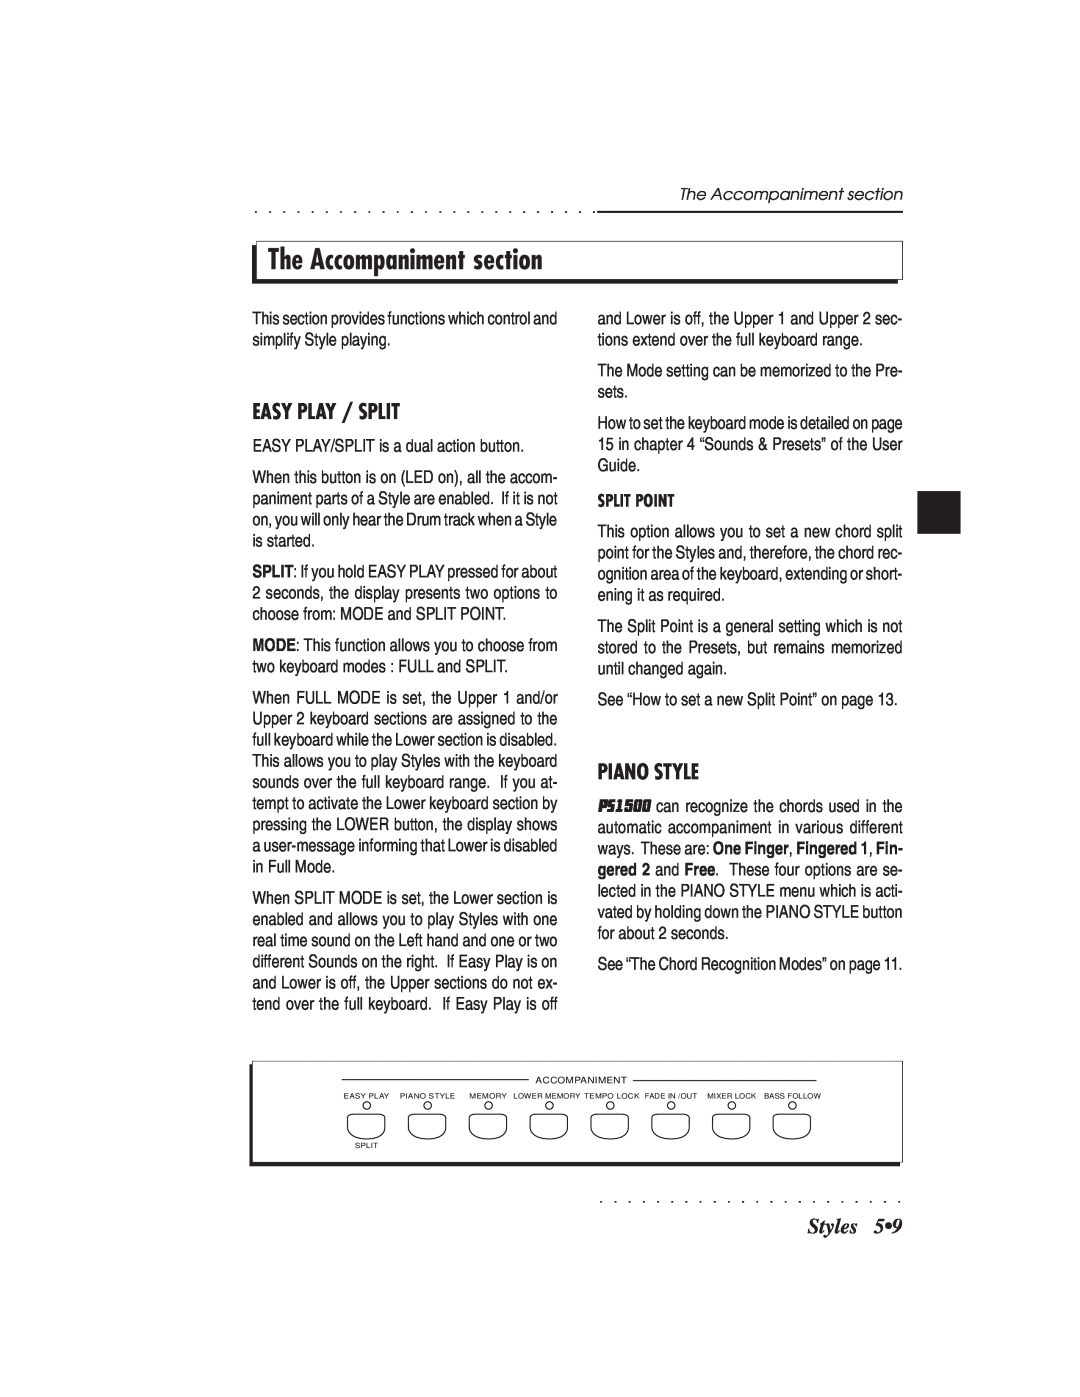 IBM PS1500 owner manual The Accompaniment section, Easy Play / Split, Piano Style, Styles, Split Point 